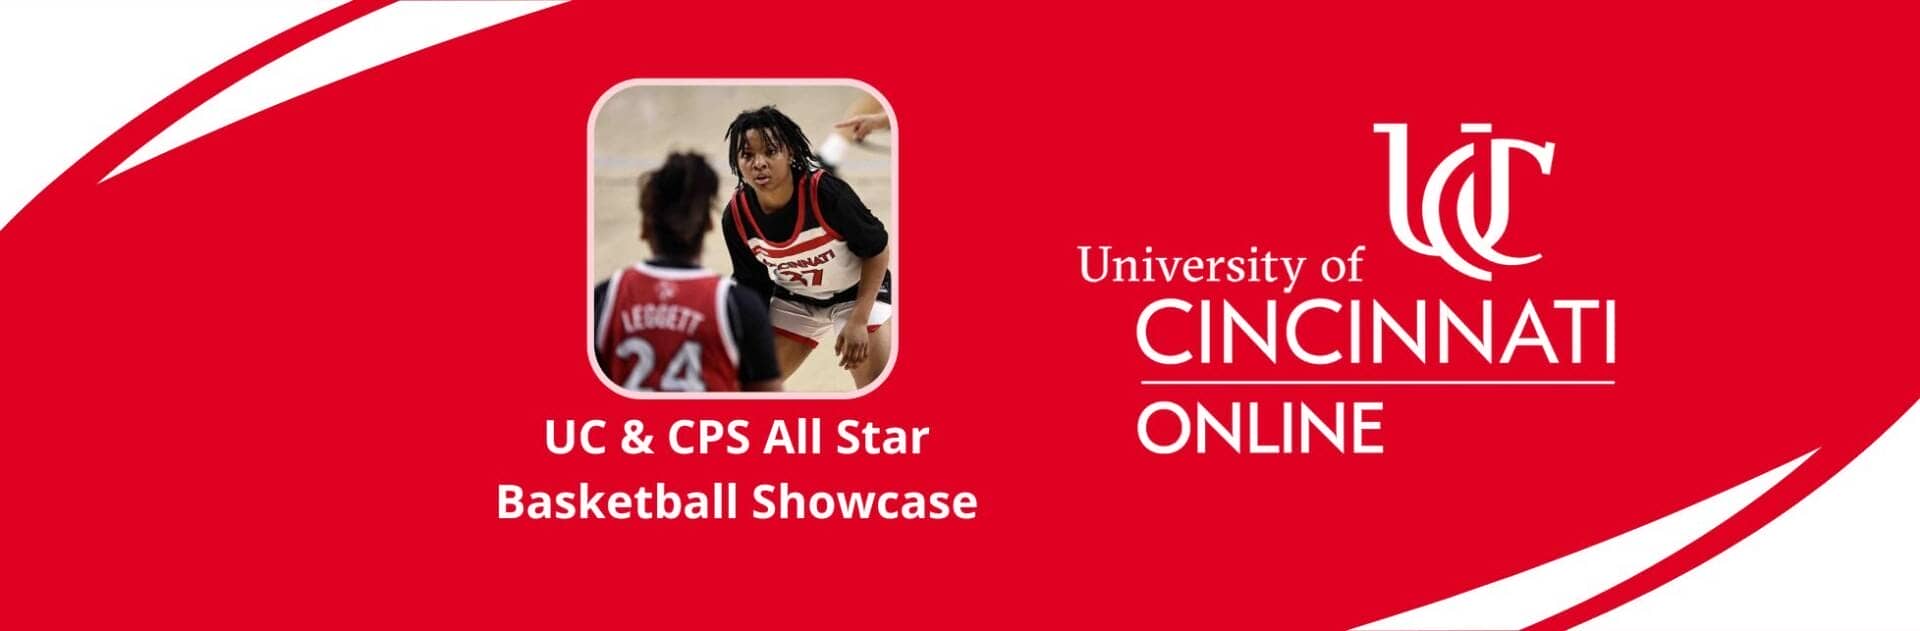 UC and CPS All Star Basketball Showcase